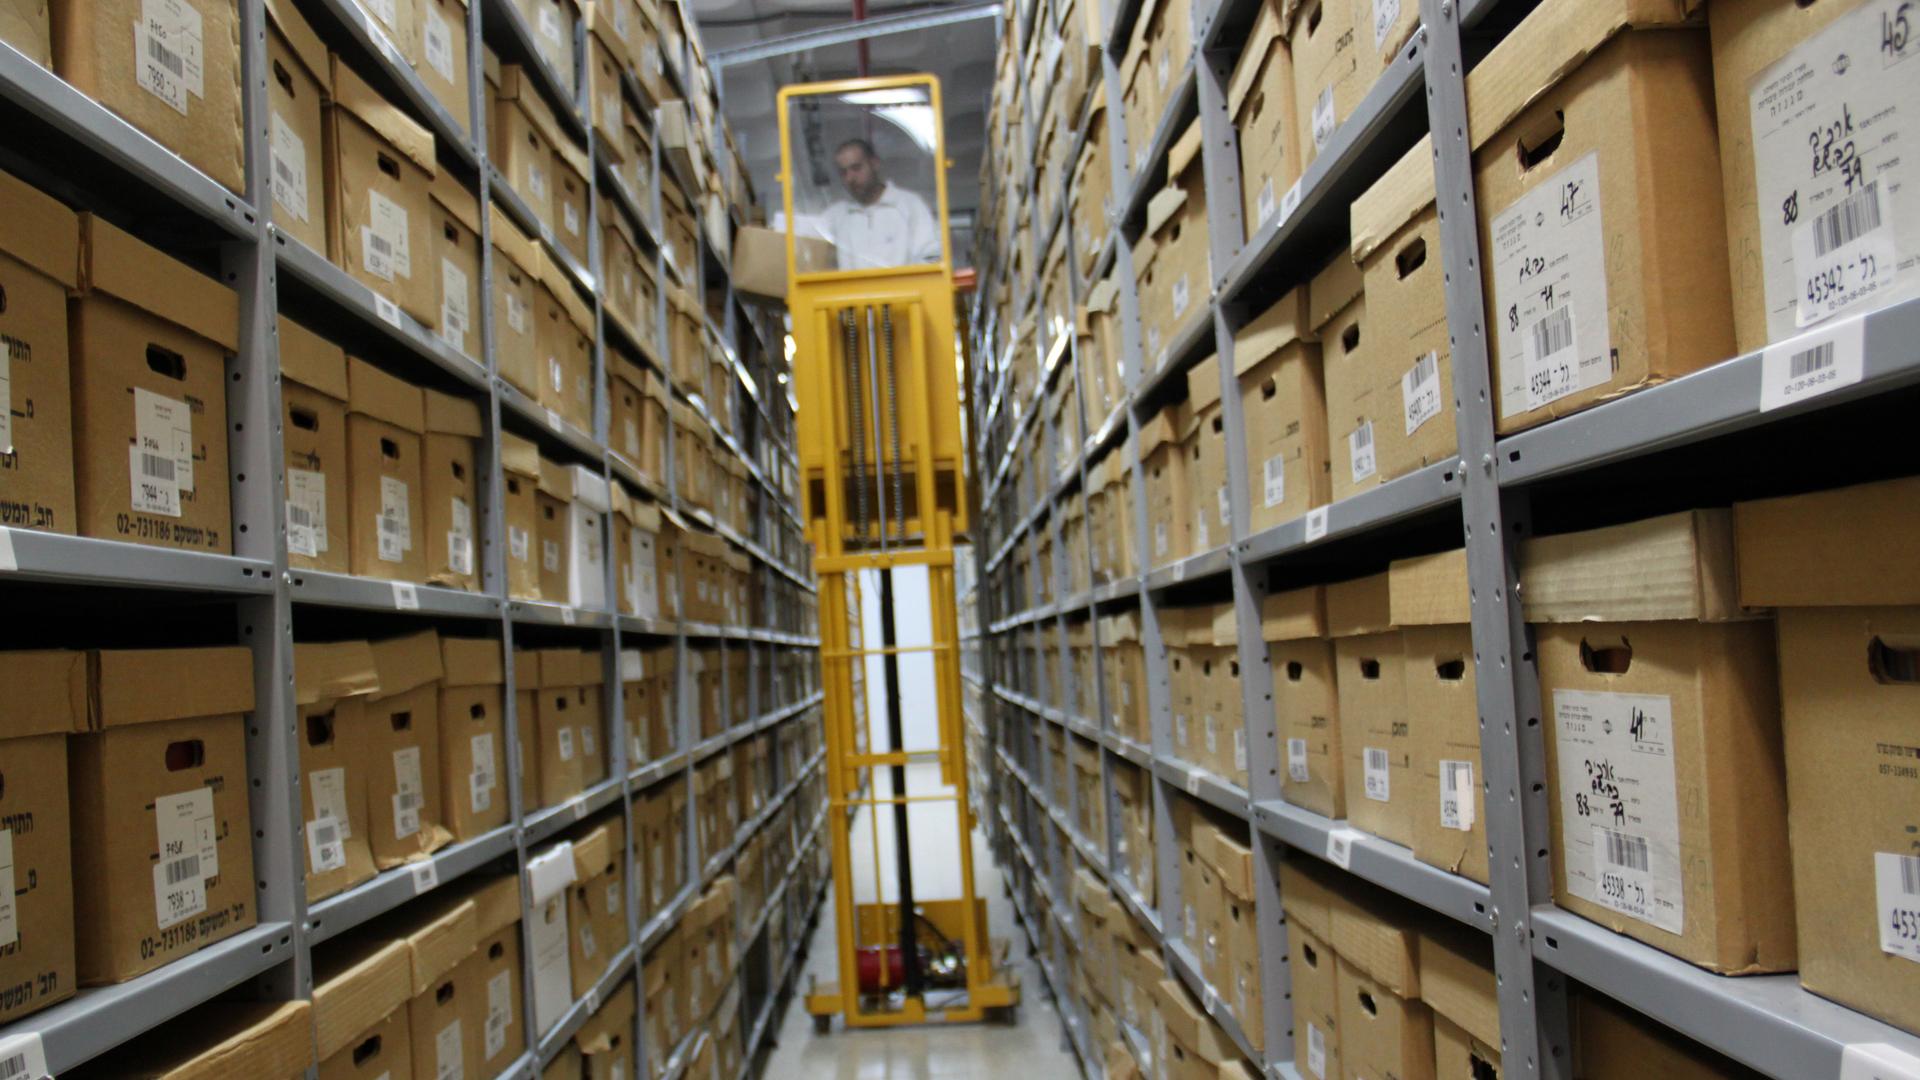 There are millions of documents in cardboard boxes in the Israel State Archives.